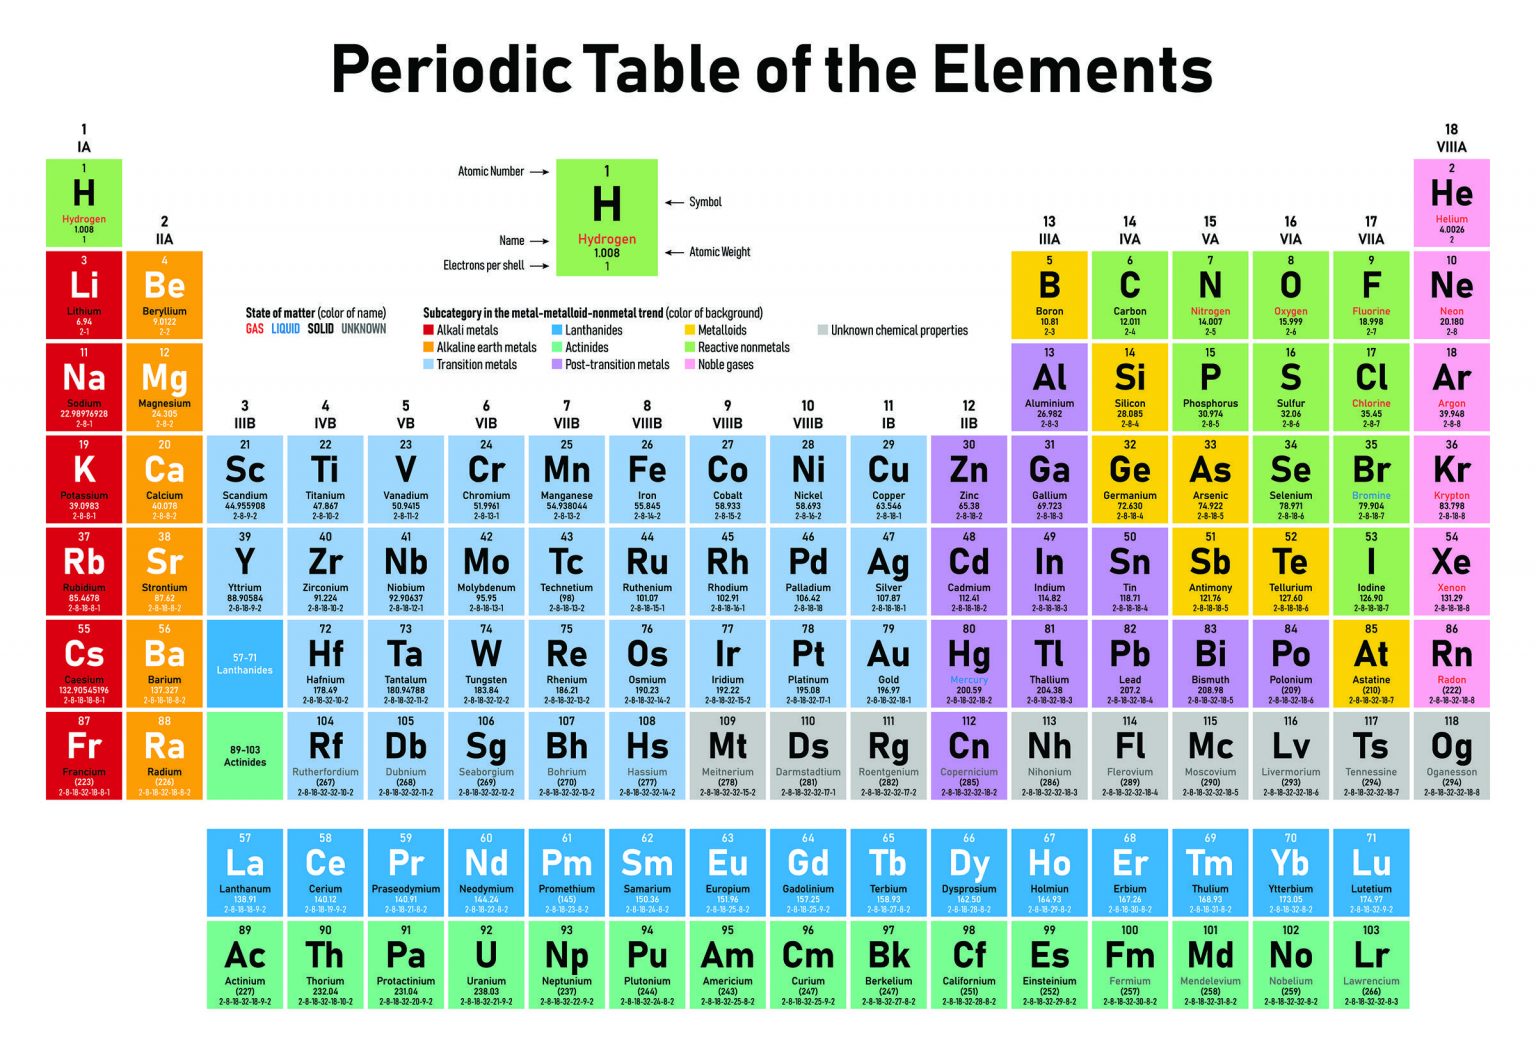 physicists-are-still-searching-for-new-heavier-elements-they-re-up-to-atomic-number-118-and-a